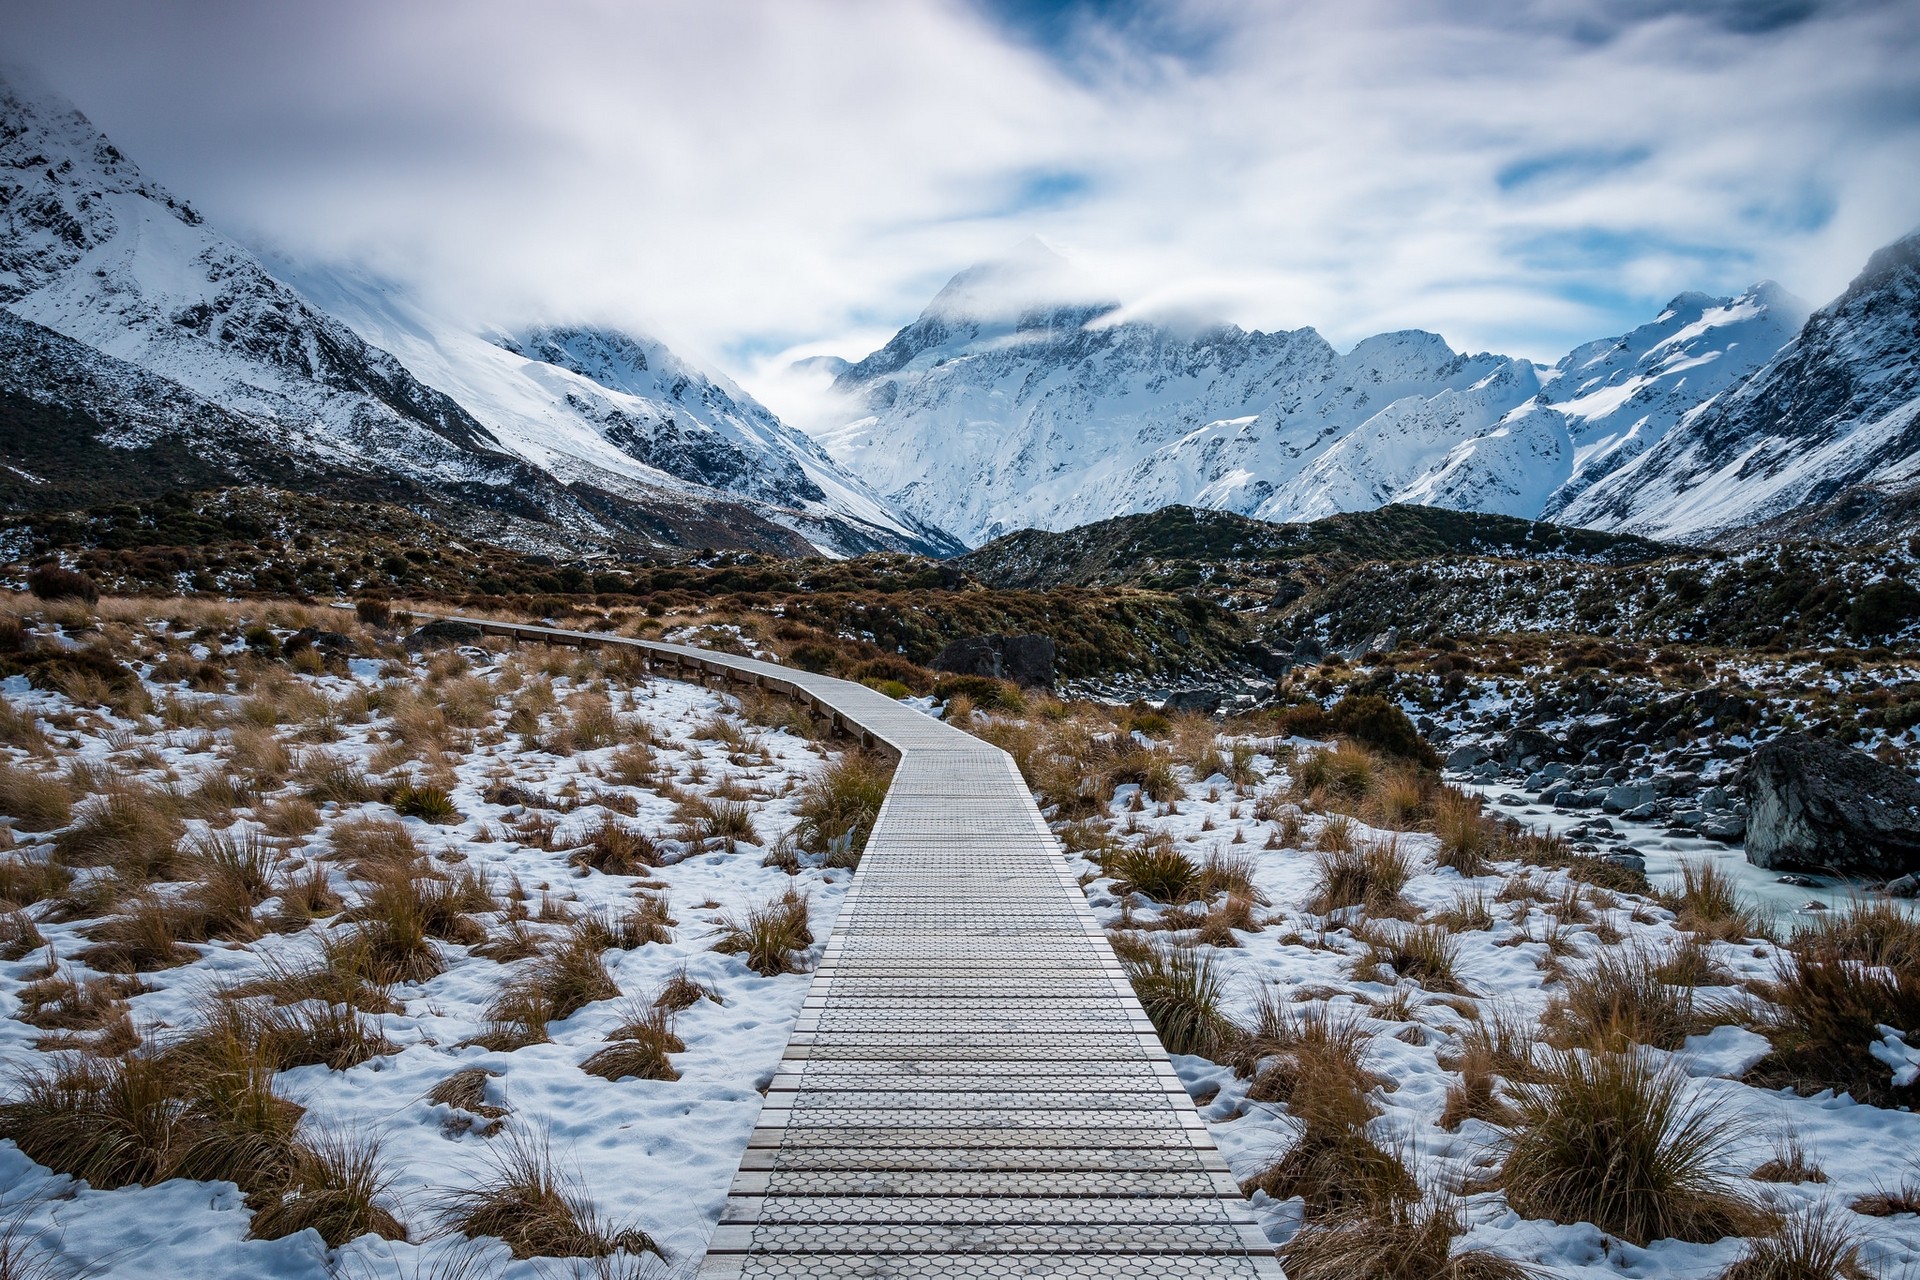 General 1920x1280 landscape mountains New Zealand Mount Cook snowy mountain nature snowy peak cold winter plants path